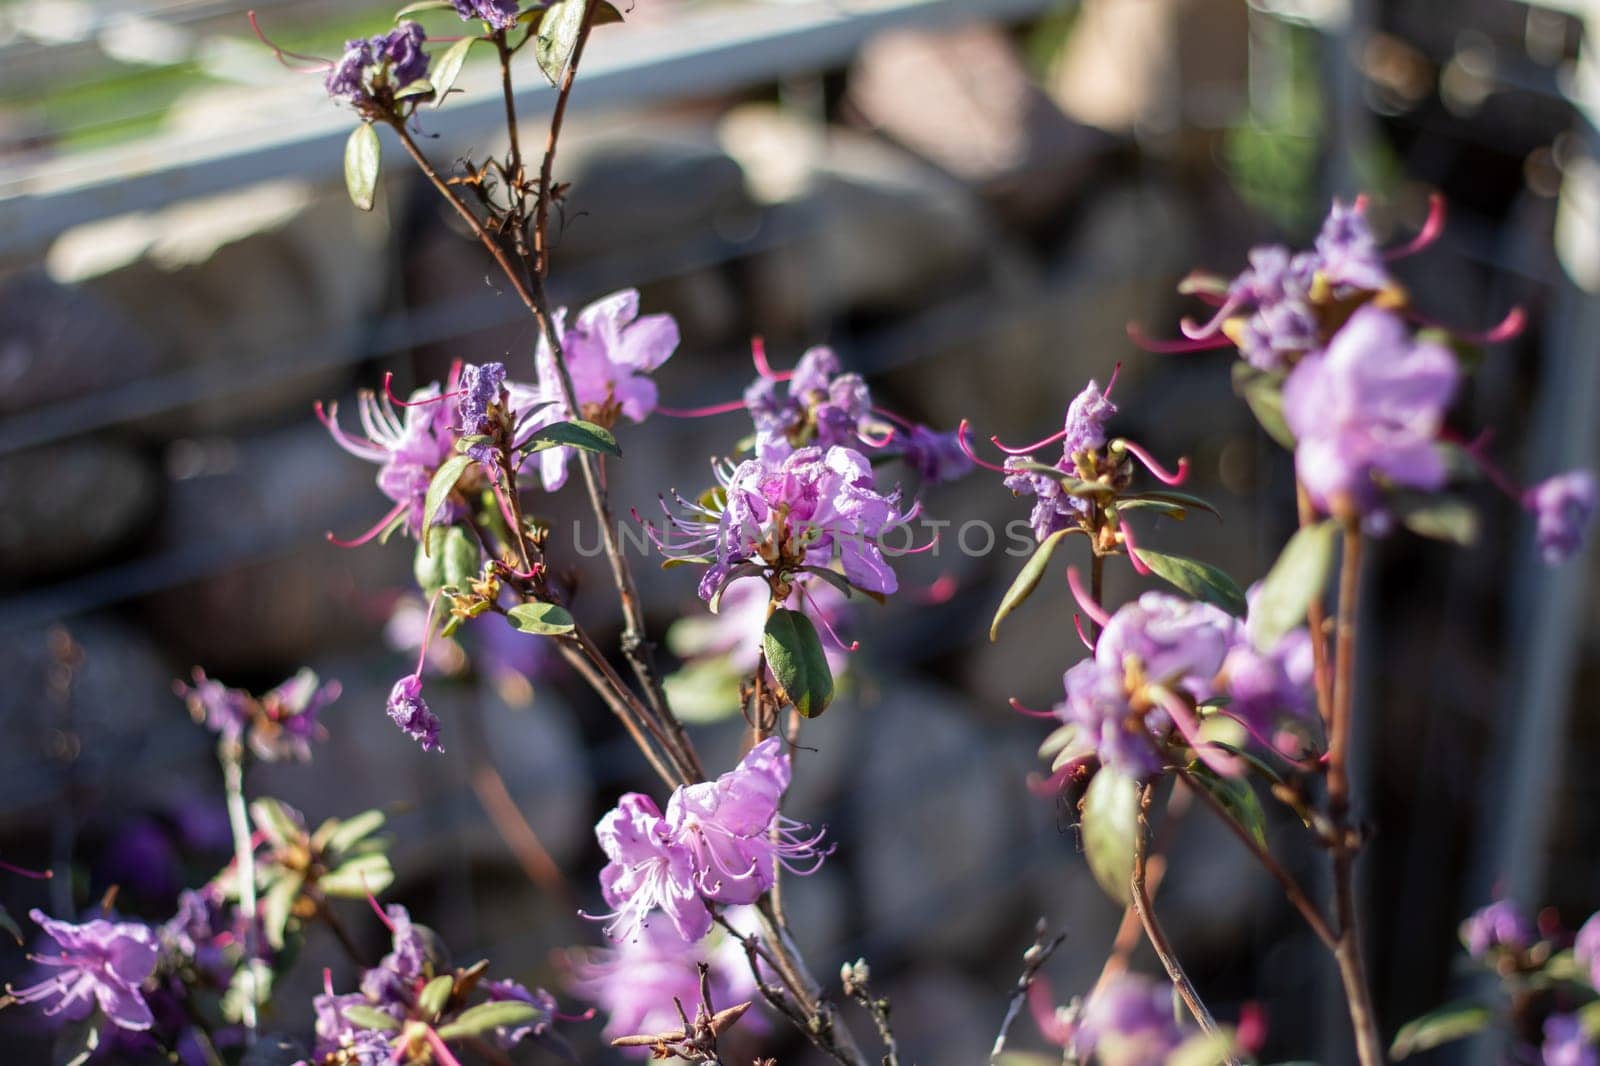 A lovely display of purple flowers adorns a shrub in spring by Vera1703